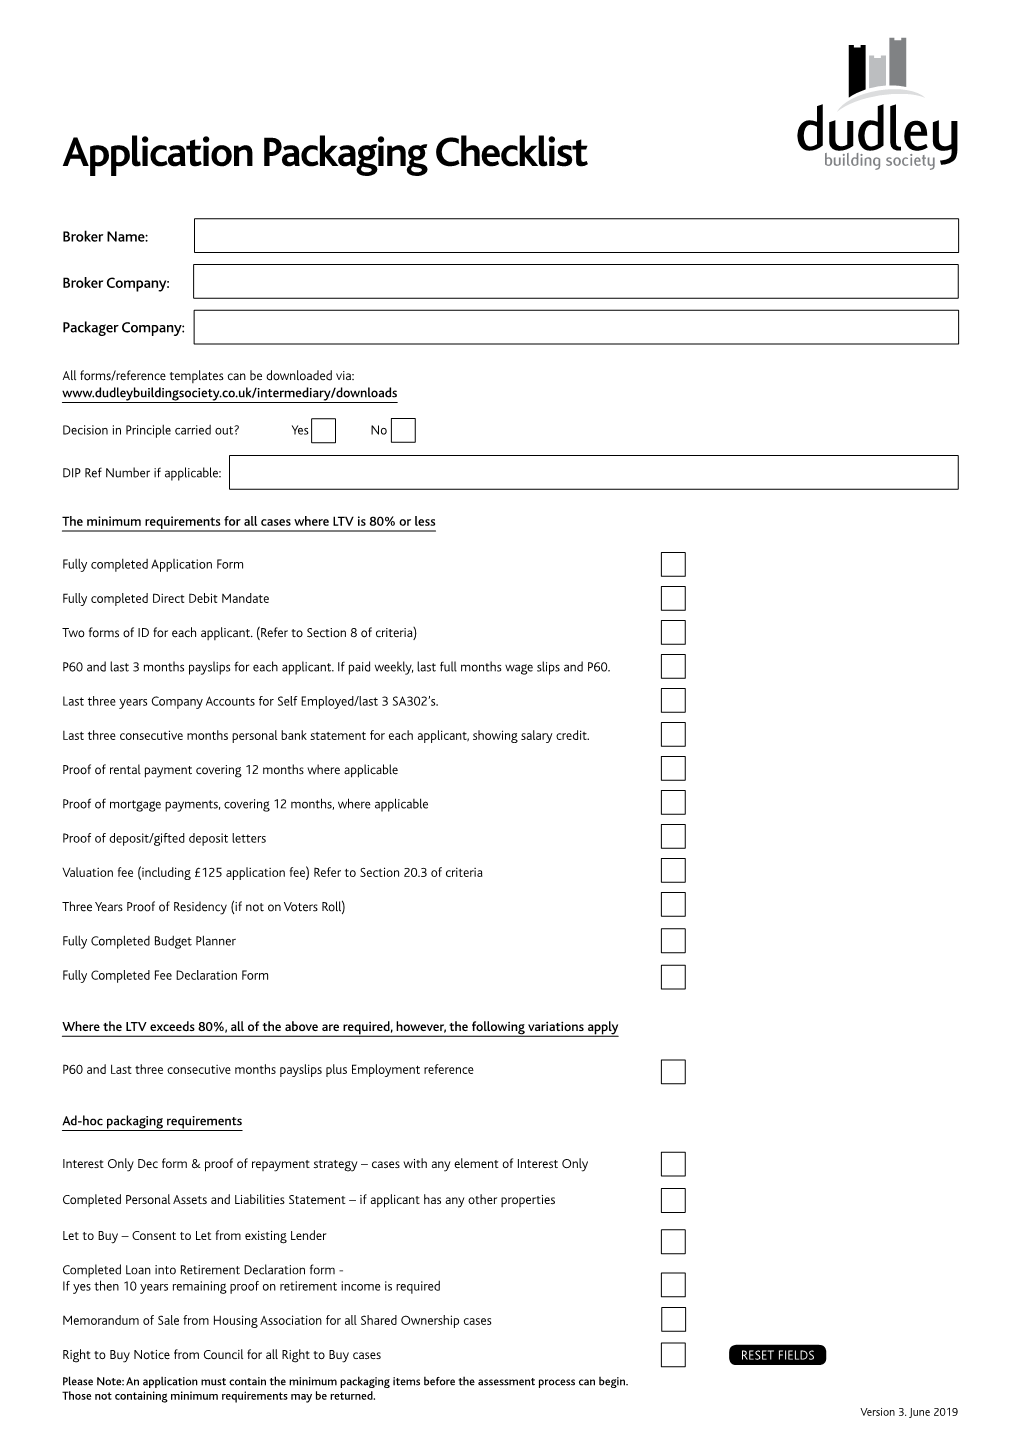 Dudley BS Mortgage Application Form and Checklist